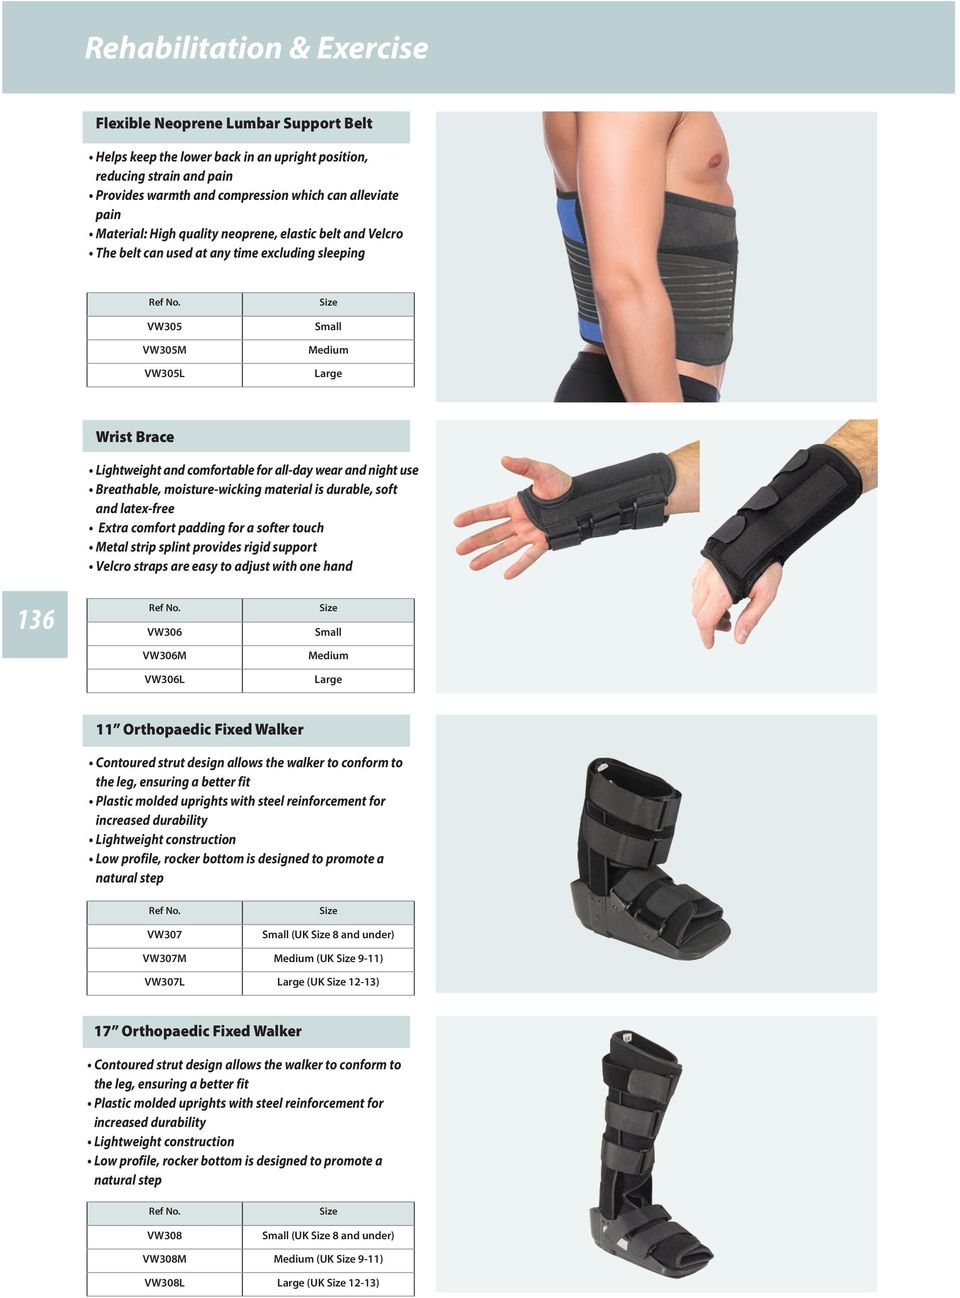 moisture-wicking material is durable, soft and latex-free Extra comfort padding for a softer touch Metal strip splint provides rigid support Velcro straps are easy to adjust with one hand 136 VW306